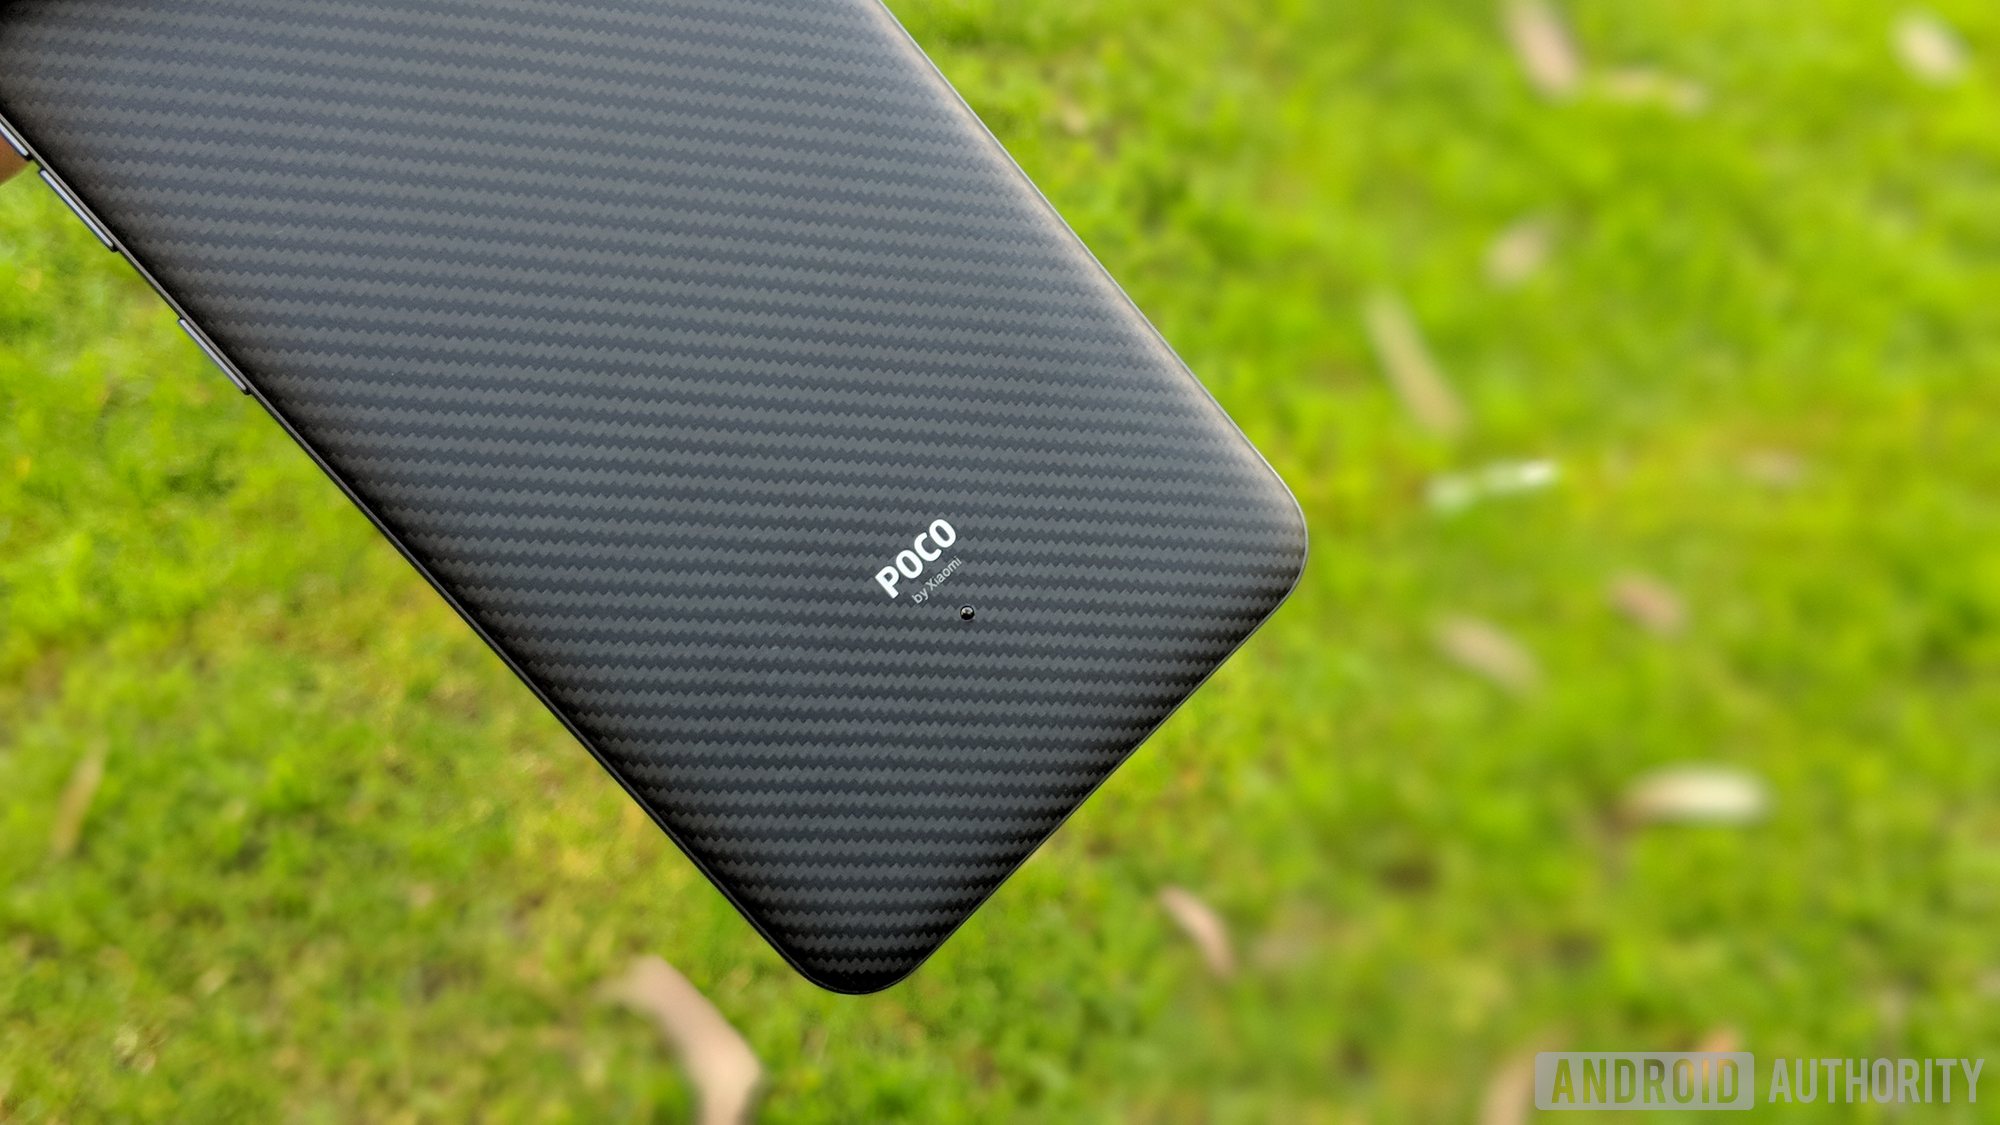 Xiaomi has given hope that a POCO F2 will pick up where the POCO F1 left off.